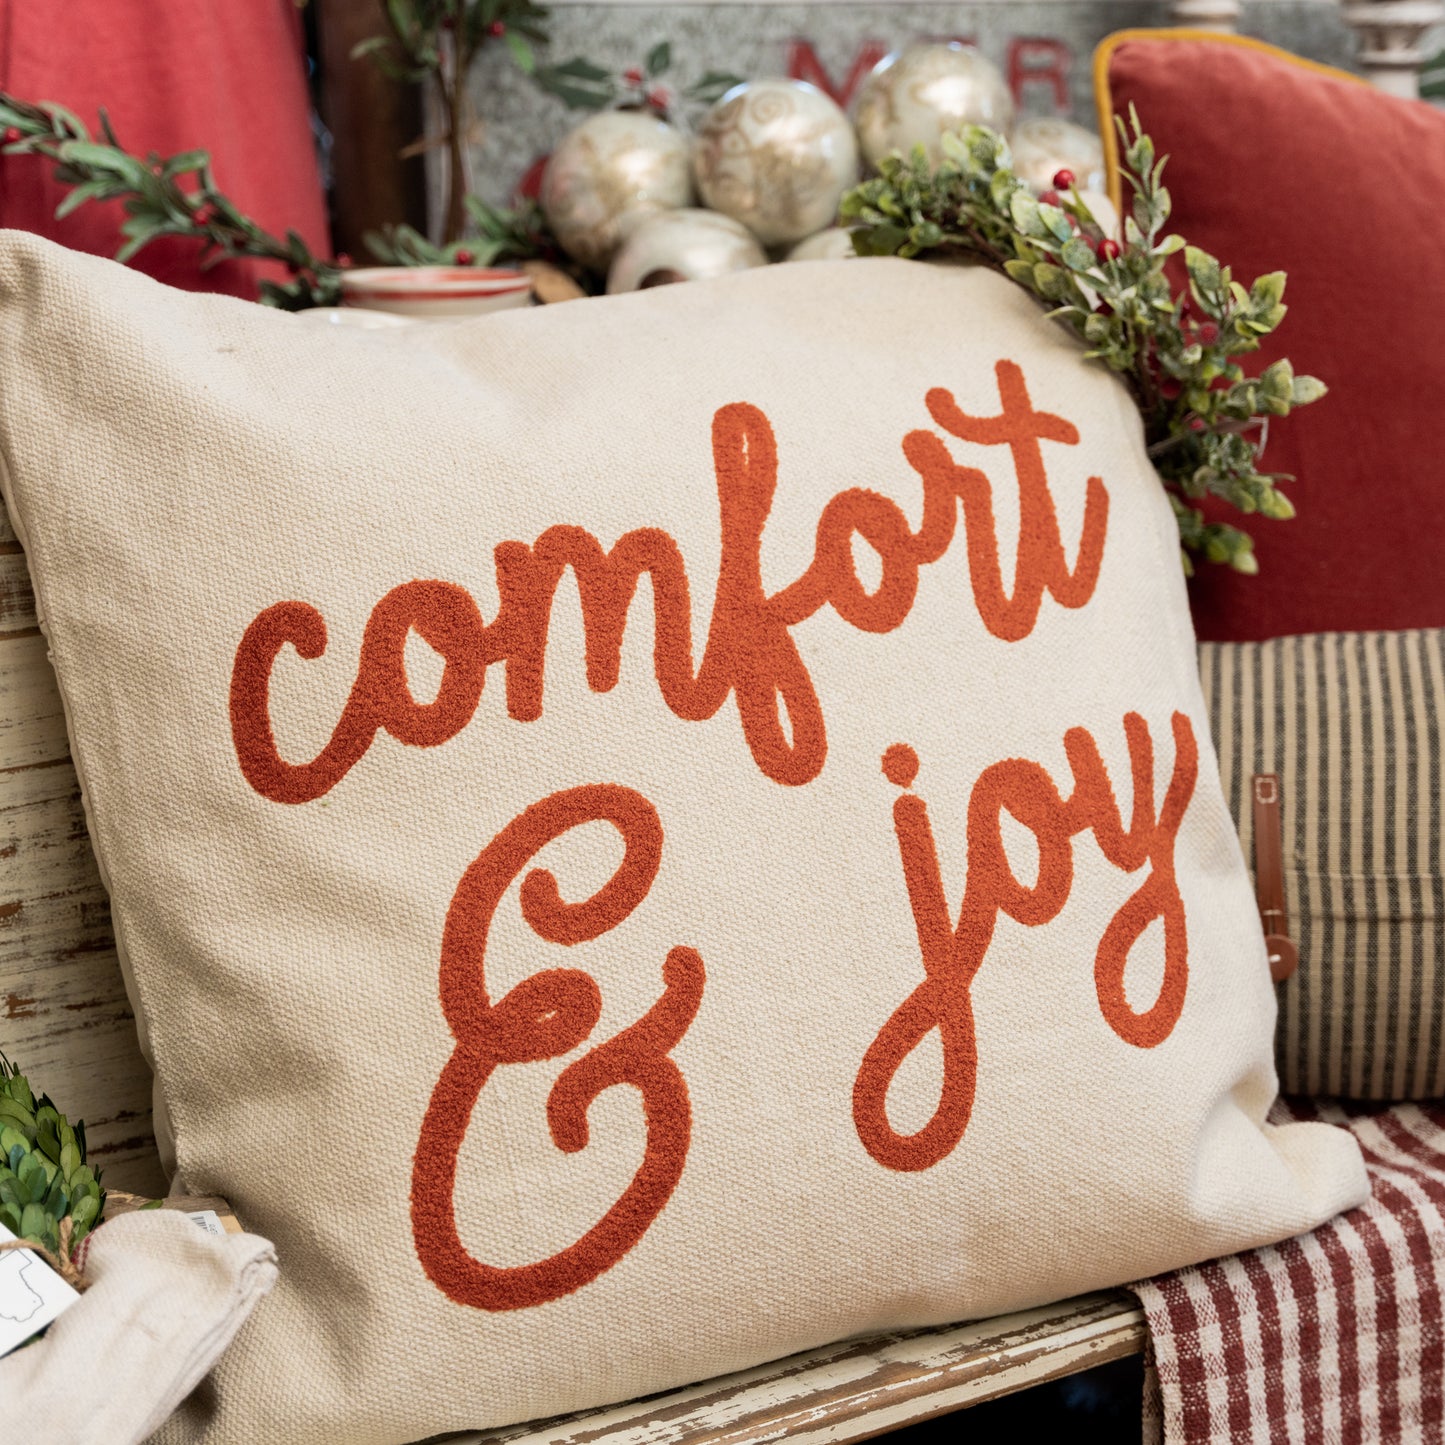 "Comfort and Joy" Embroidered Pillow